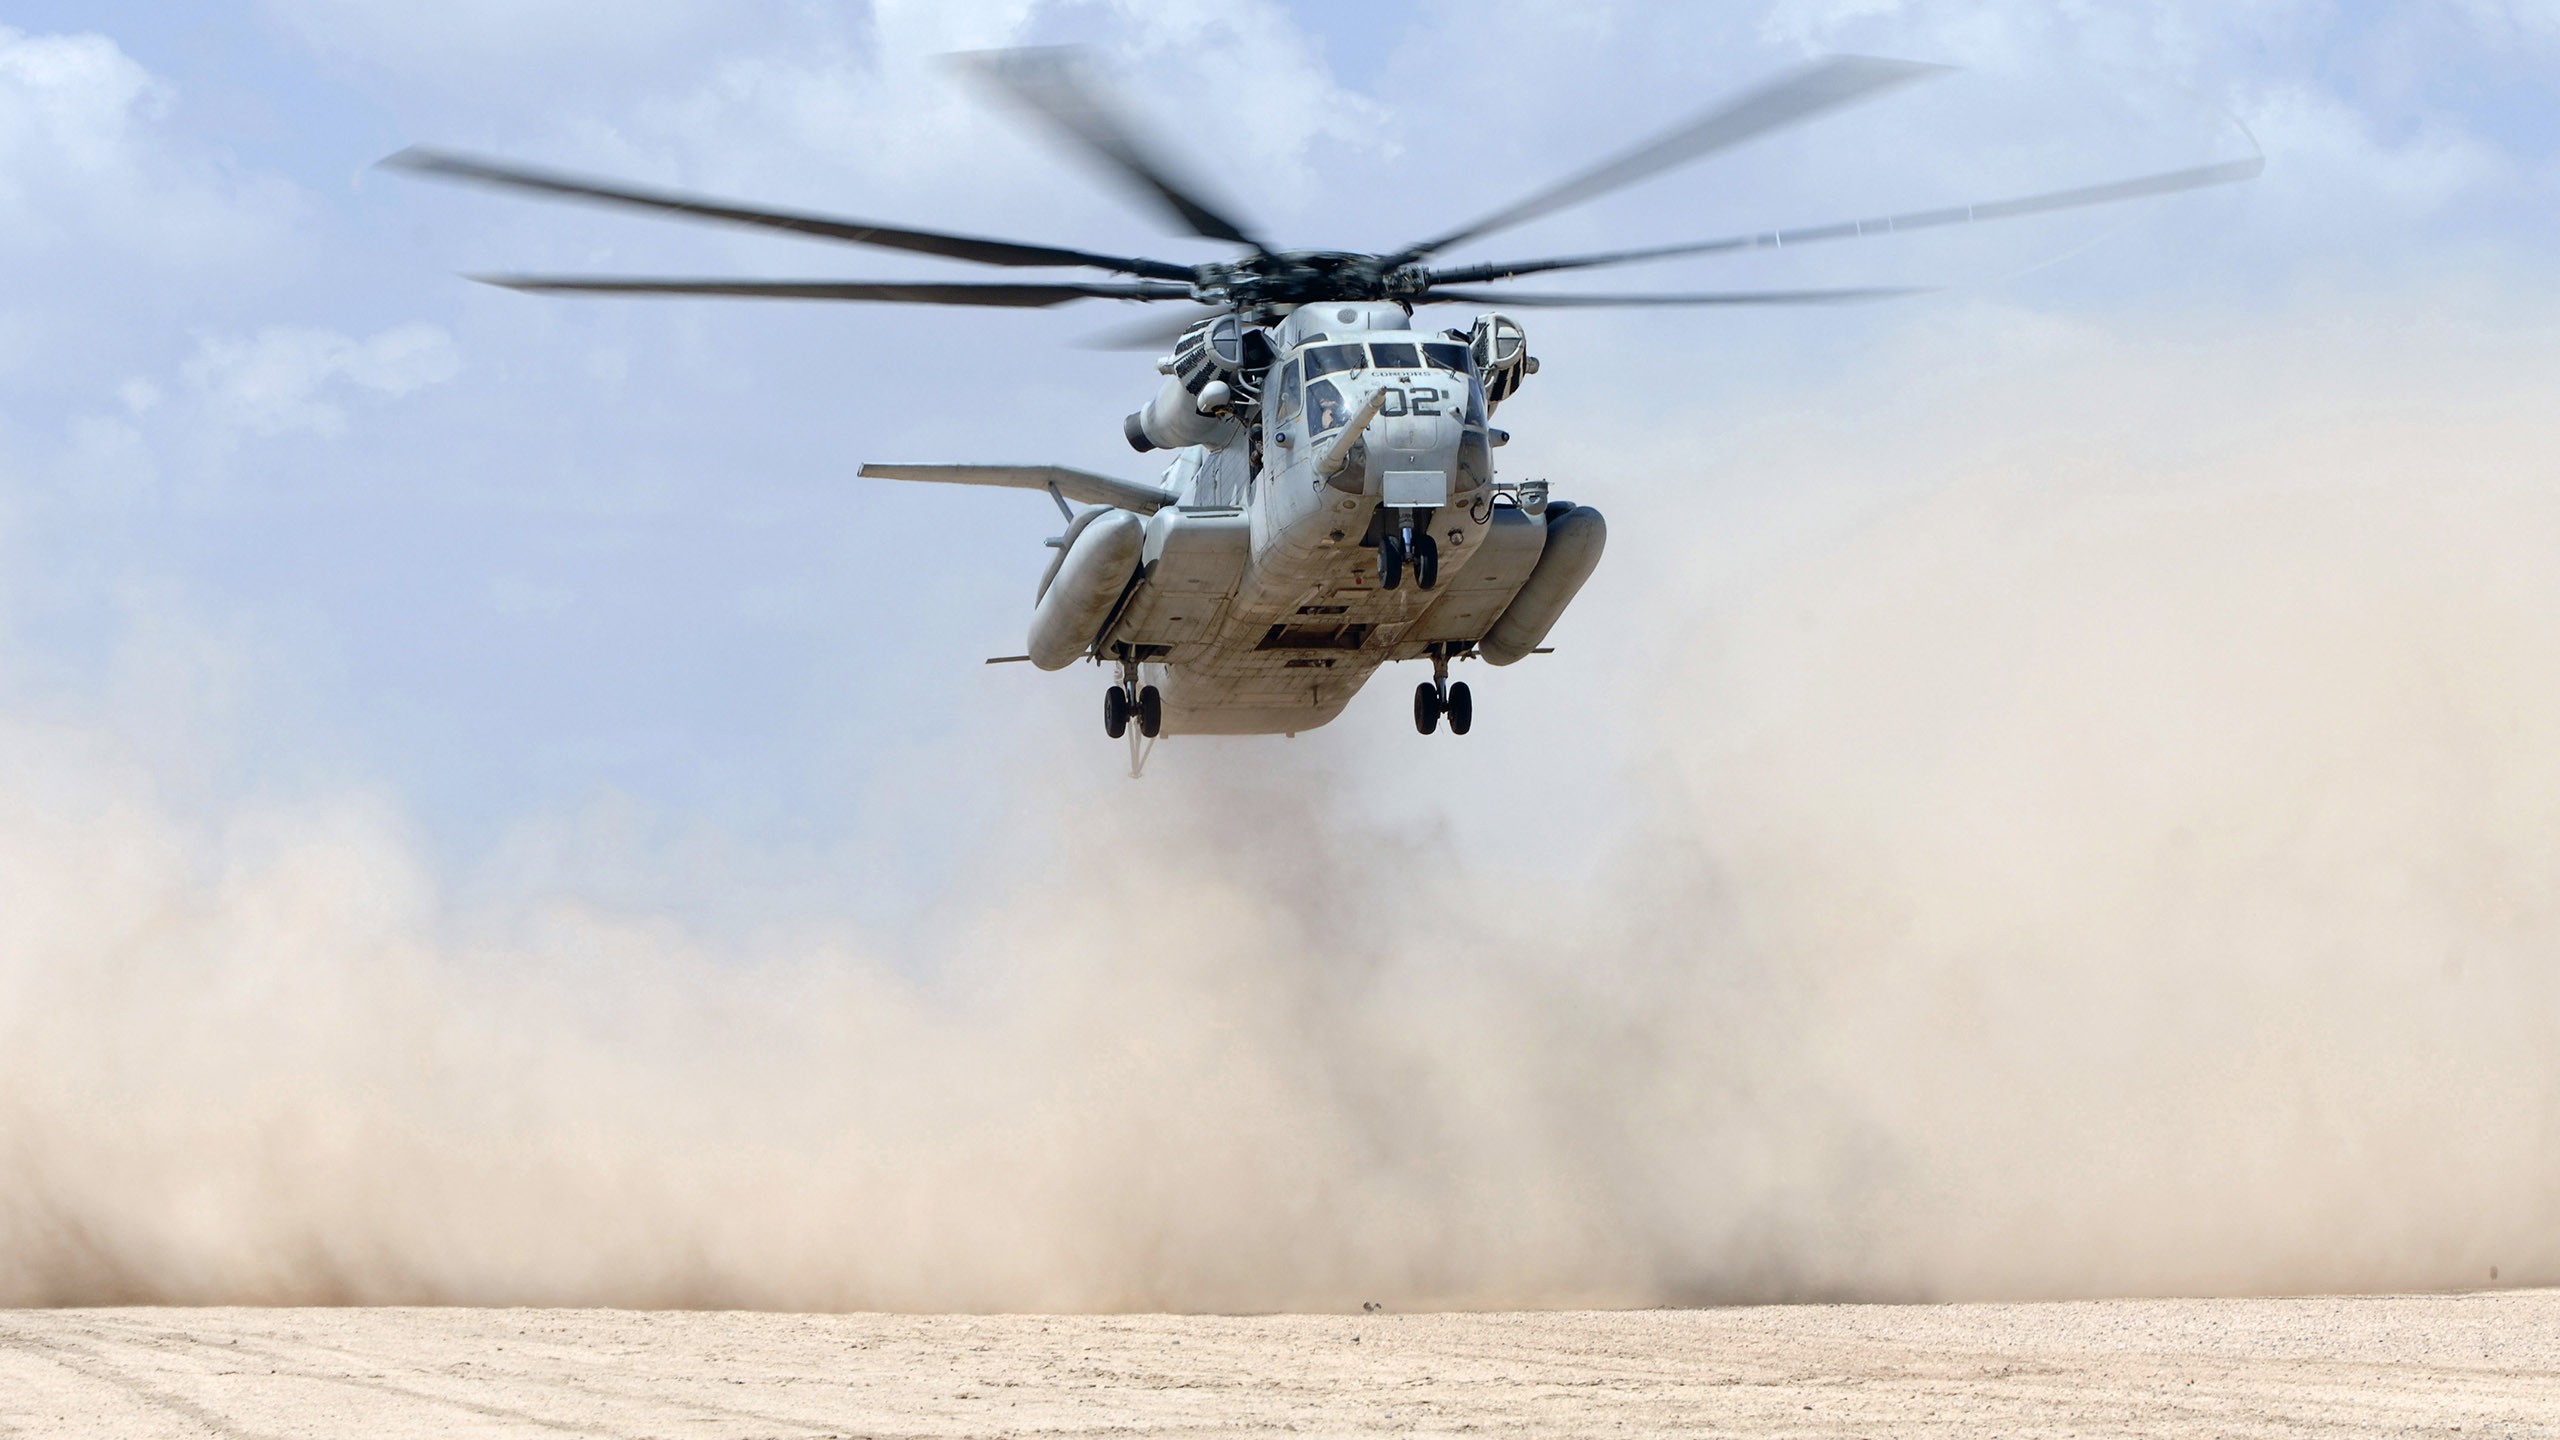 General 2560x1440 military aircraft vehicle military helicopters Sikorsky CH-53D Sea Stallion American aircraft aircraft clouds frontal view sky dust